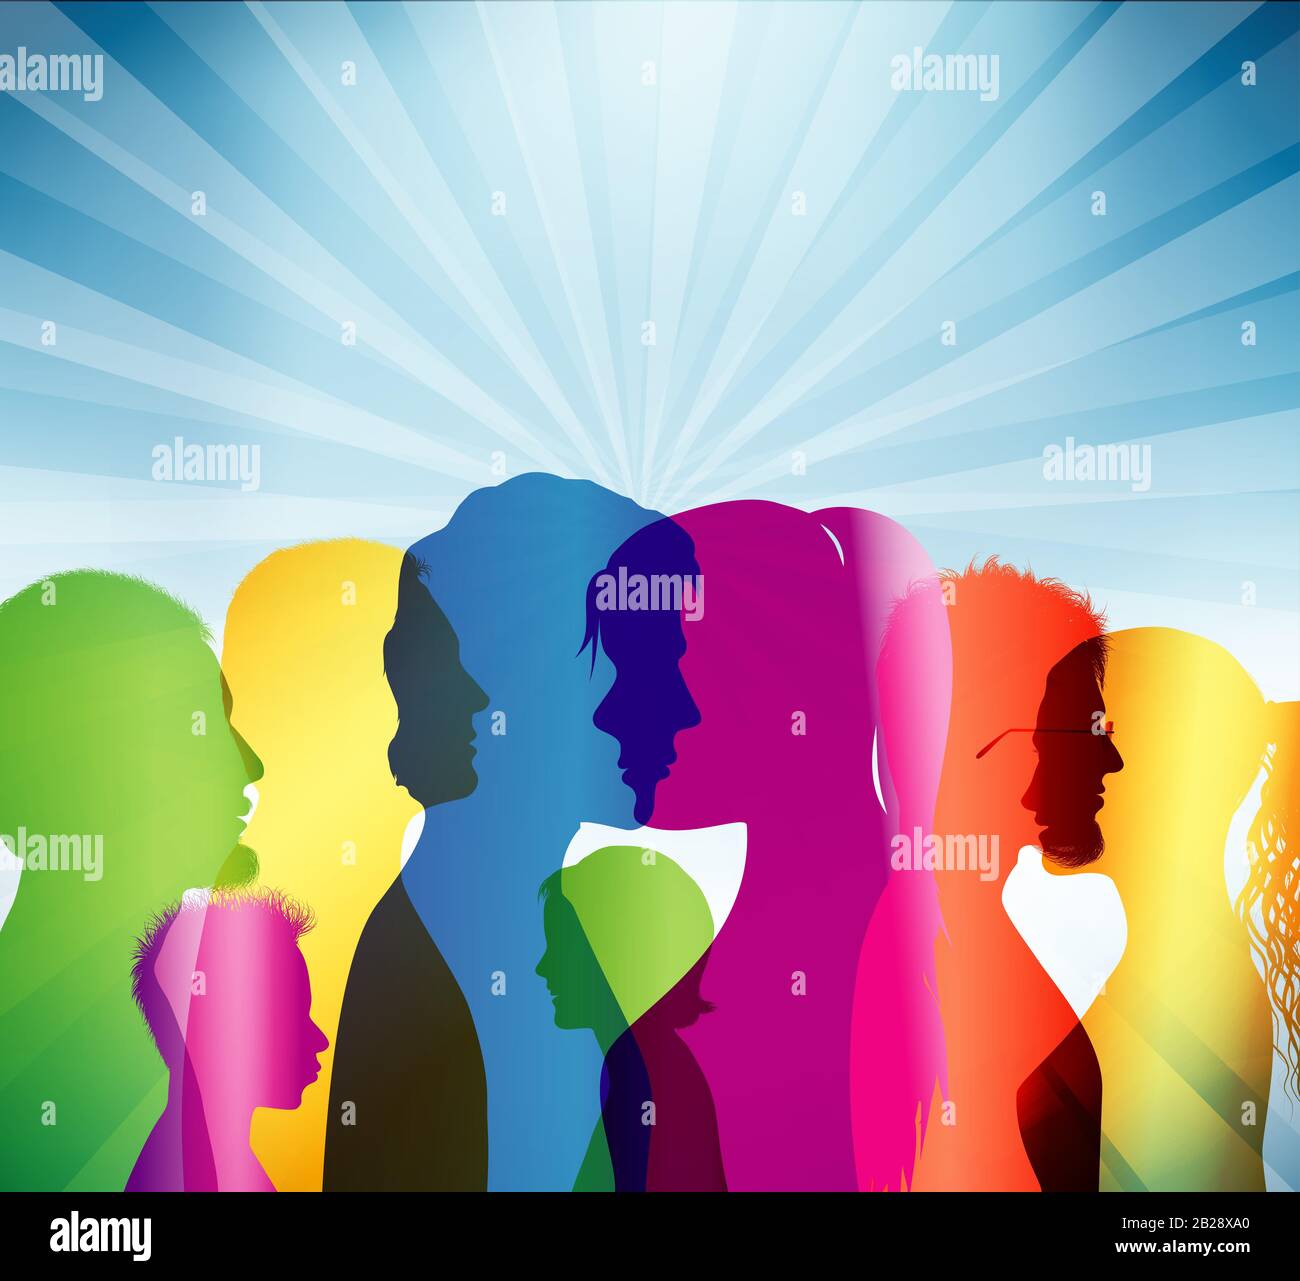 Crowd. Communication diversity people. Group multiethnic people. Colored silhouette profiles. Community. Communicate. Social network. Multicultural Stock Photo